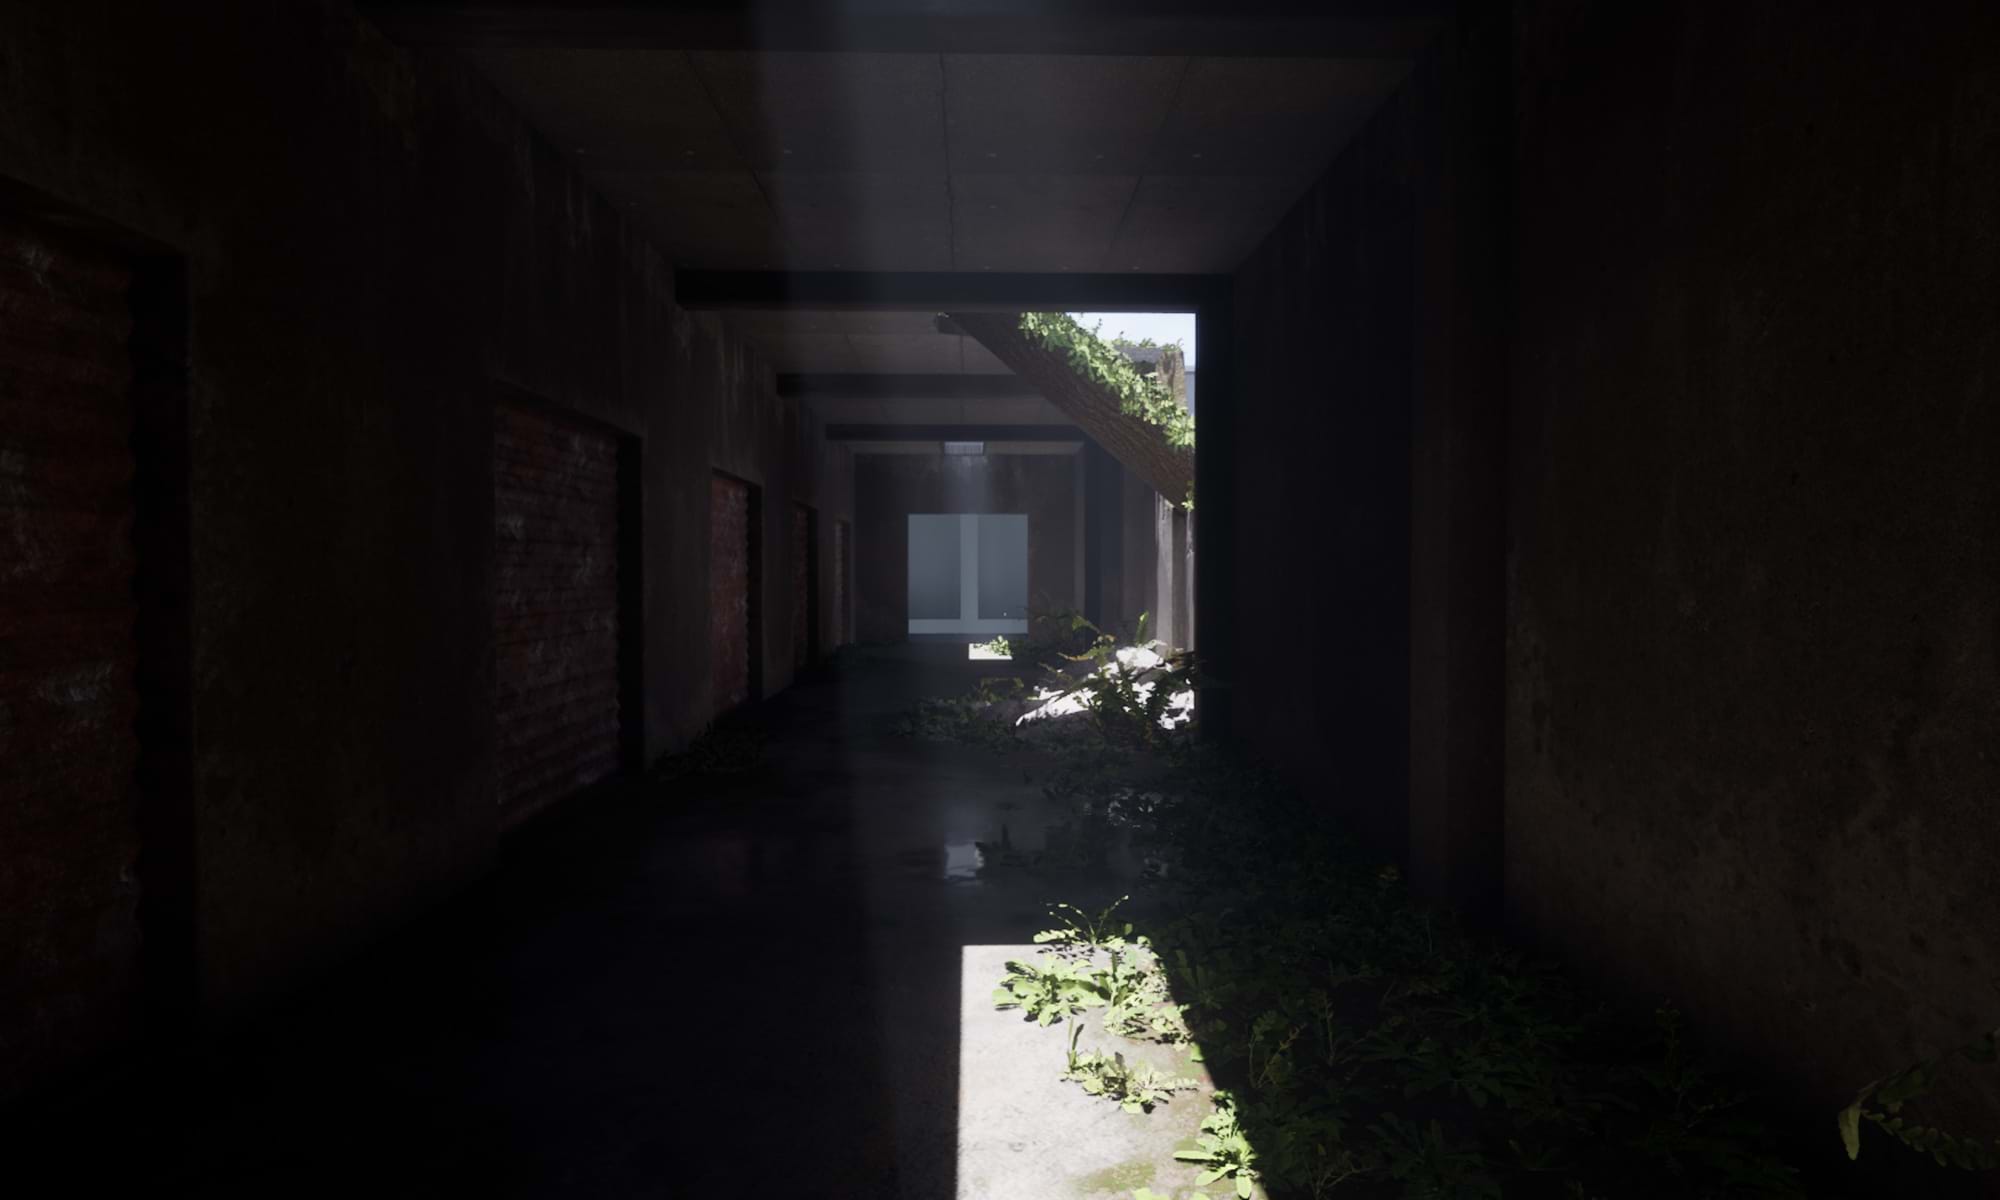 'Creating an Atmospheric Game Environment' is a 2023 Digital Graduate Show project by Rohan Thorat, a Computer Arts student at Abertay University.